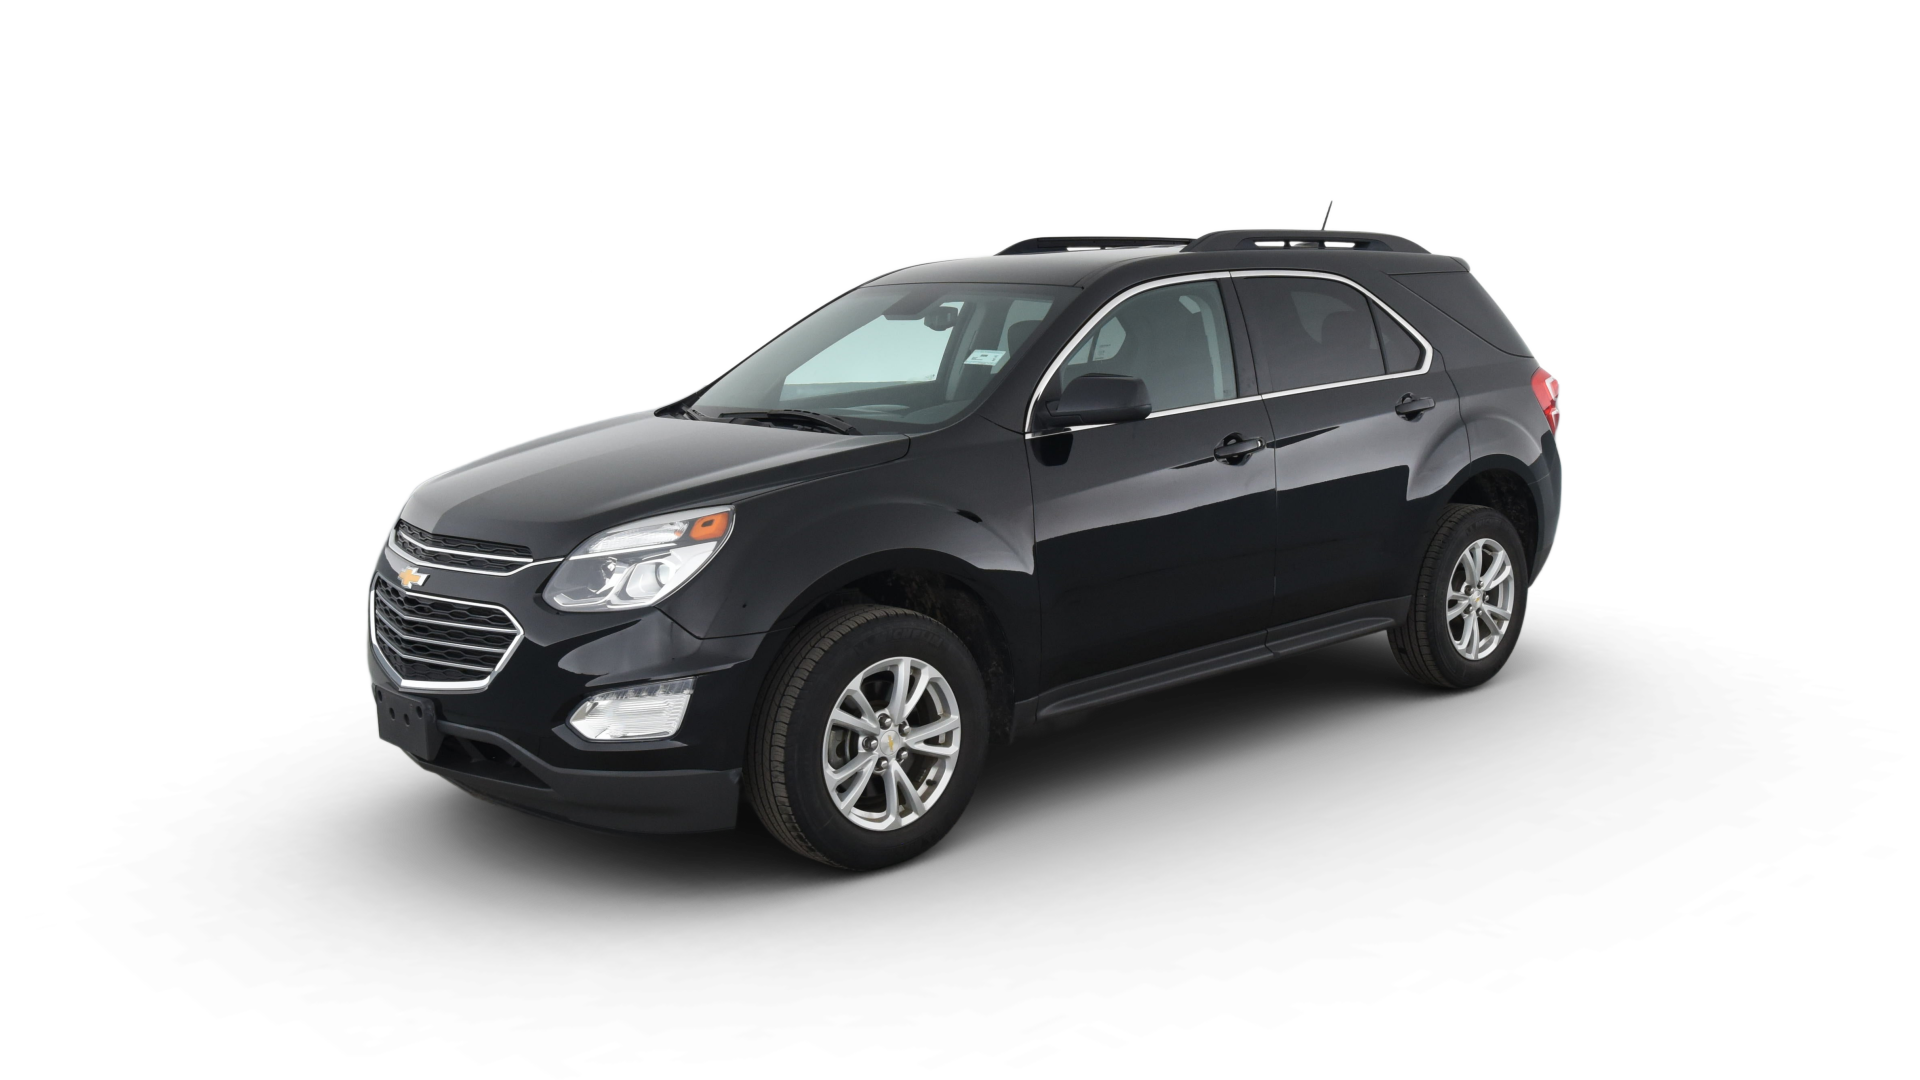 Used 2016 Chevrolet Equinox For Sale Online | Carvana